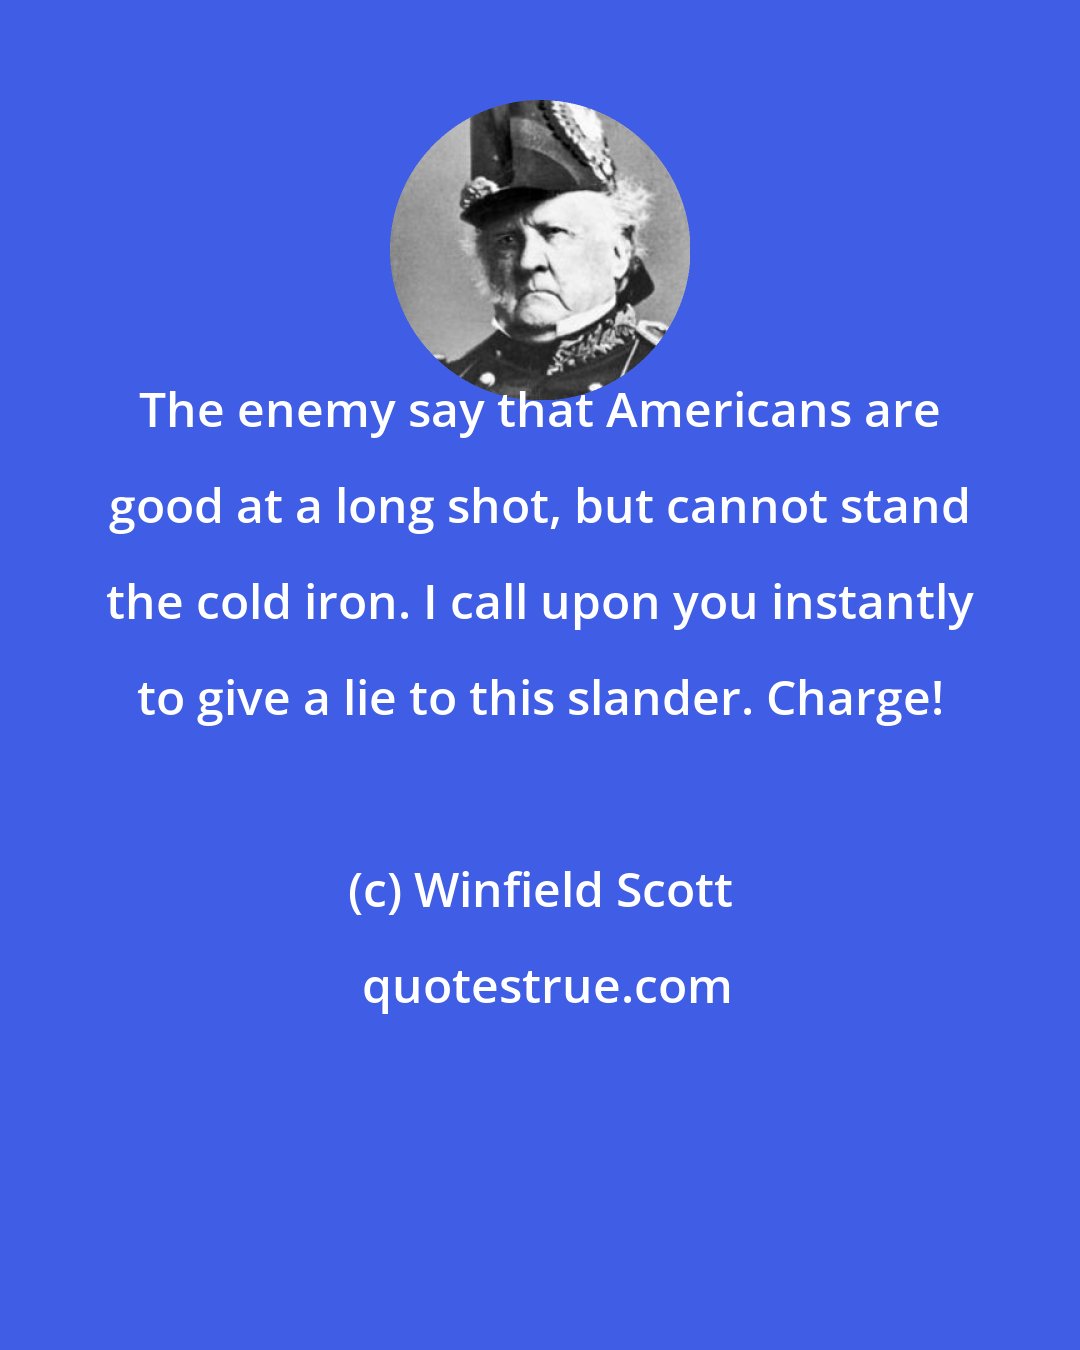 Winfield Scott: The enemy say that Americans are good at a long shot, but cannot stand the cold iron. I call upon you instantly to give a lie to this slander. Charge!